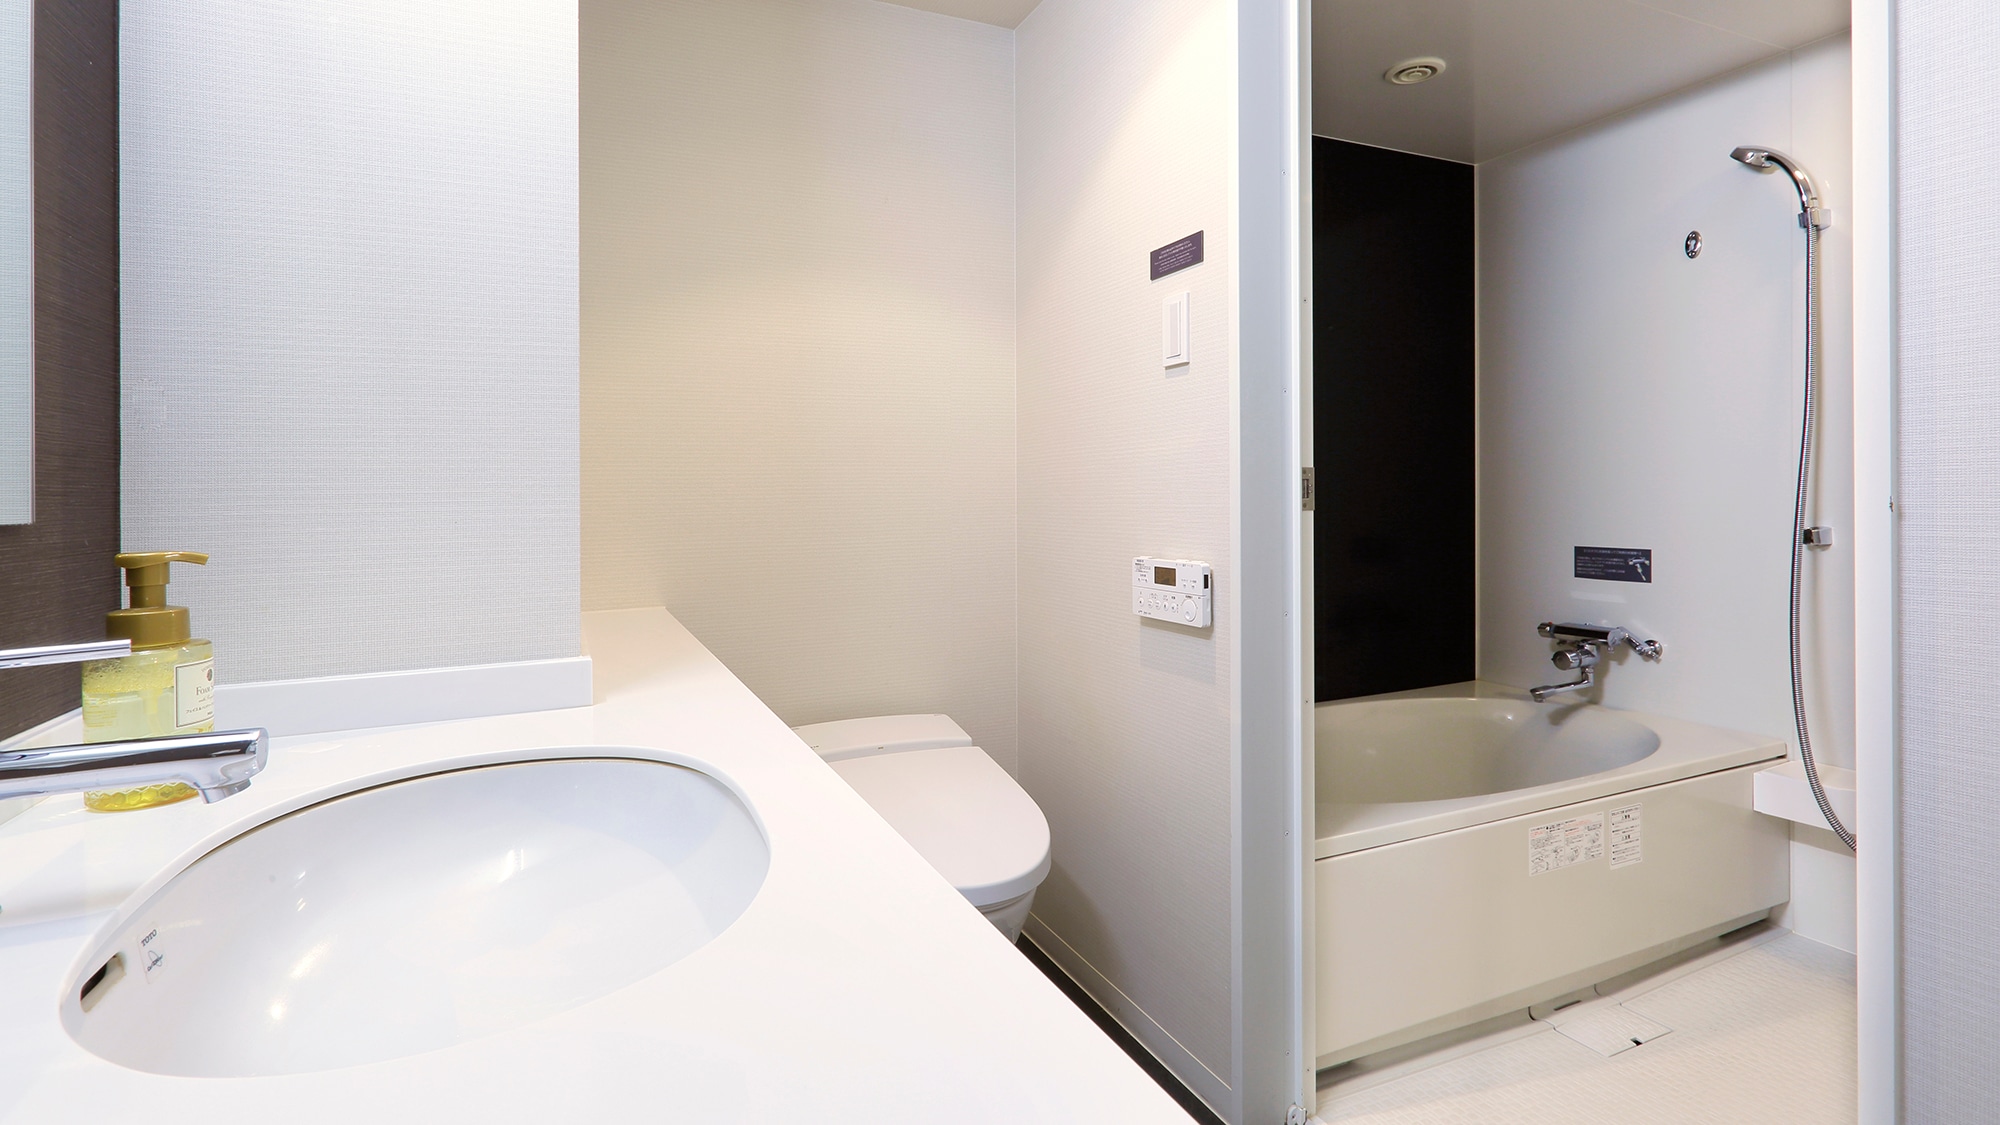 Twin rooms have separate bath and toilet